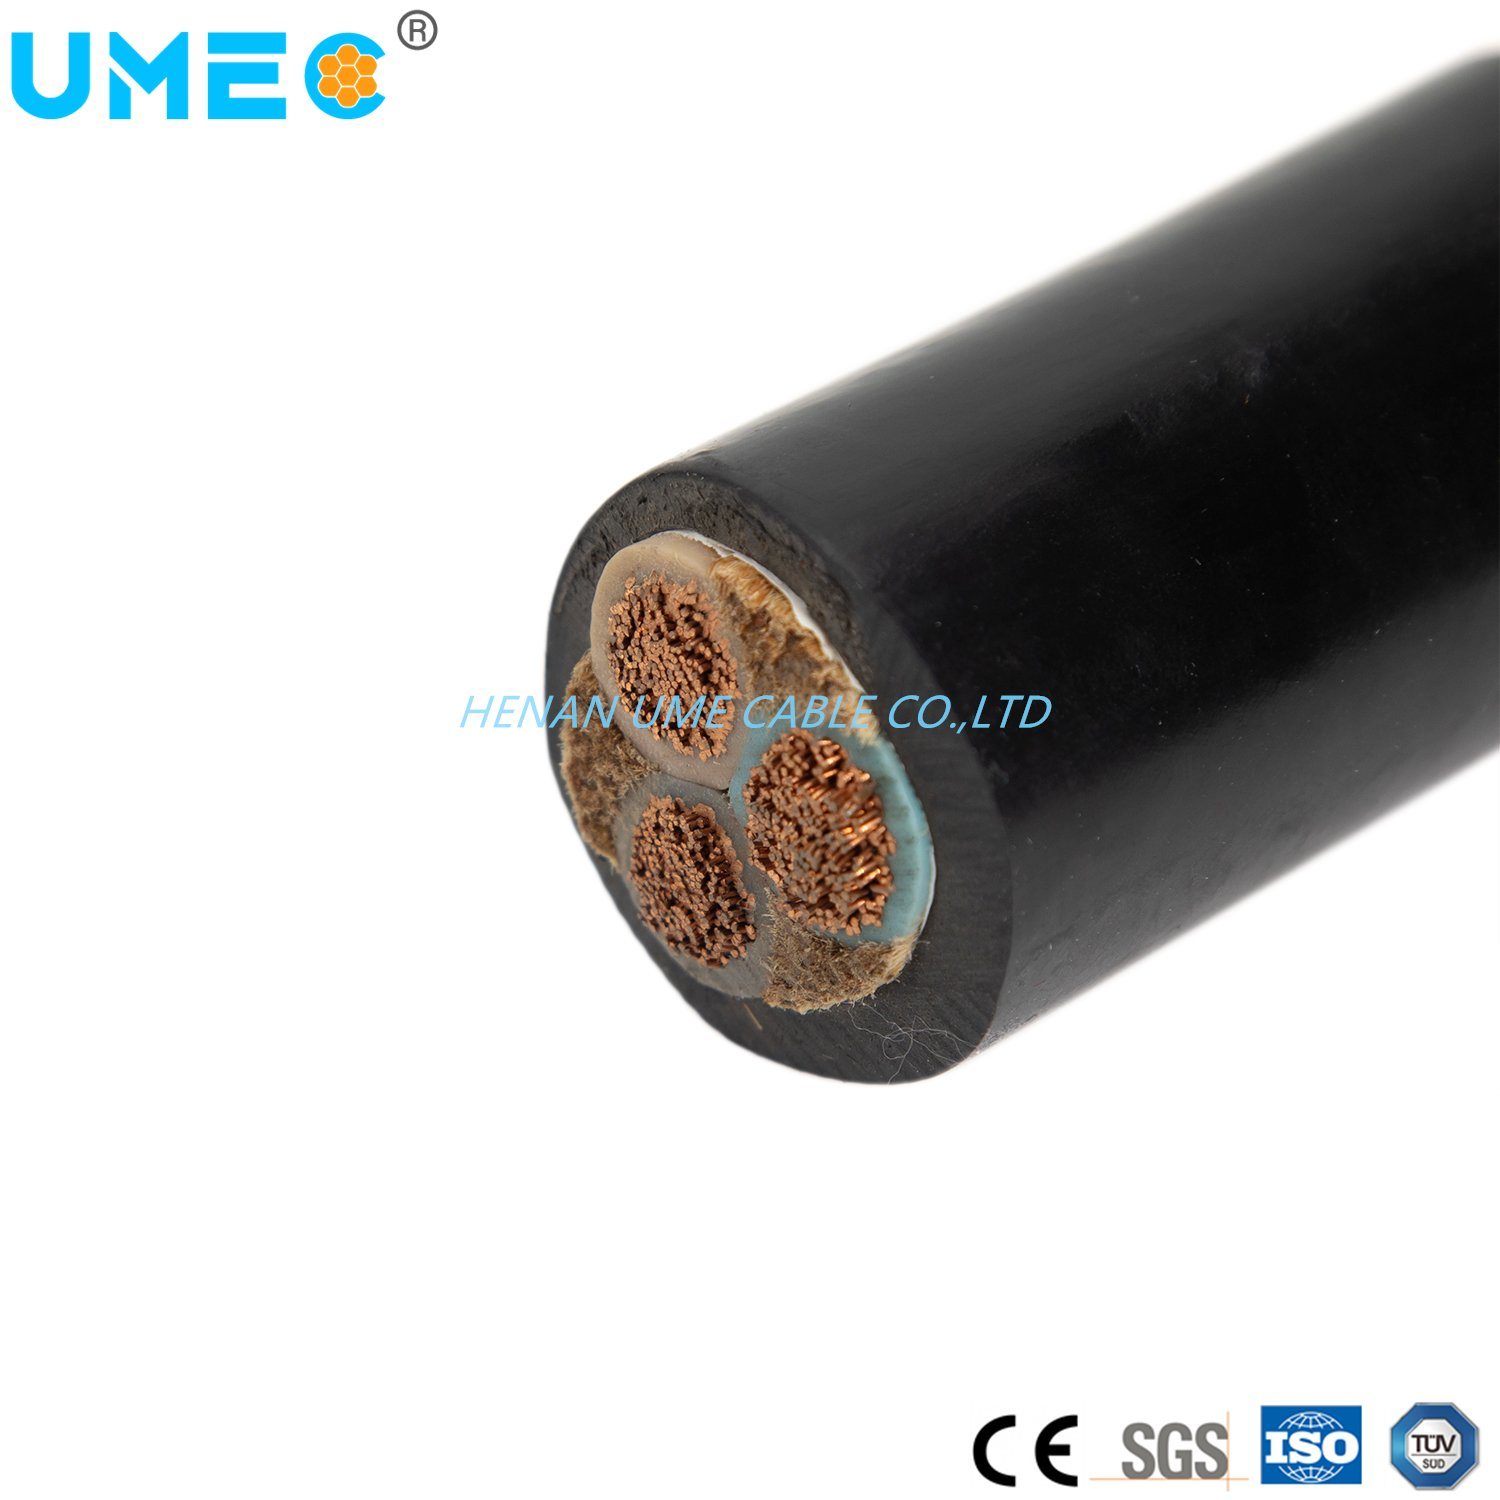 Utility 300/500V 450/750V Rubber Sheathed Flexible Cable 1/2/3/4/5 Cores H07rnf